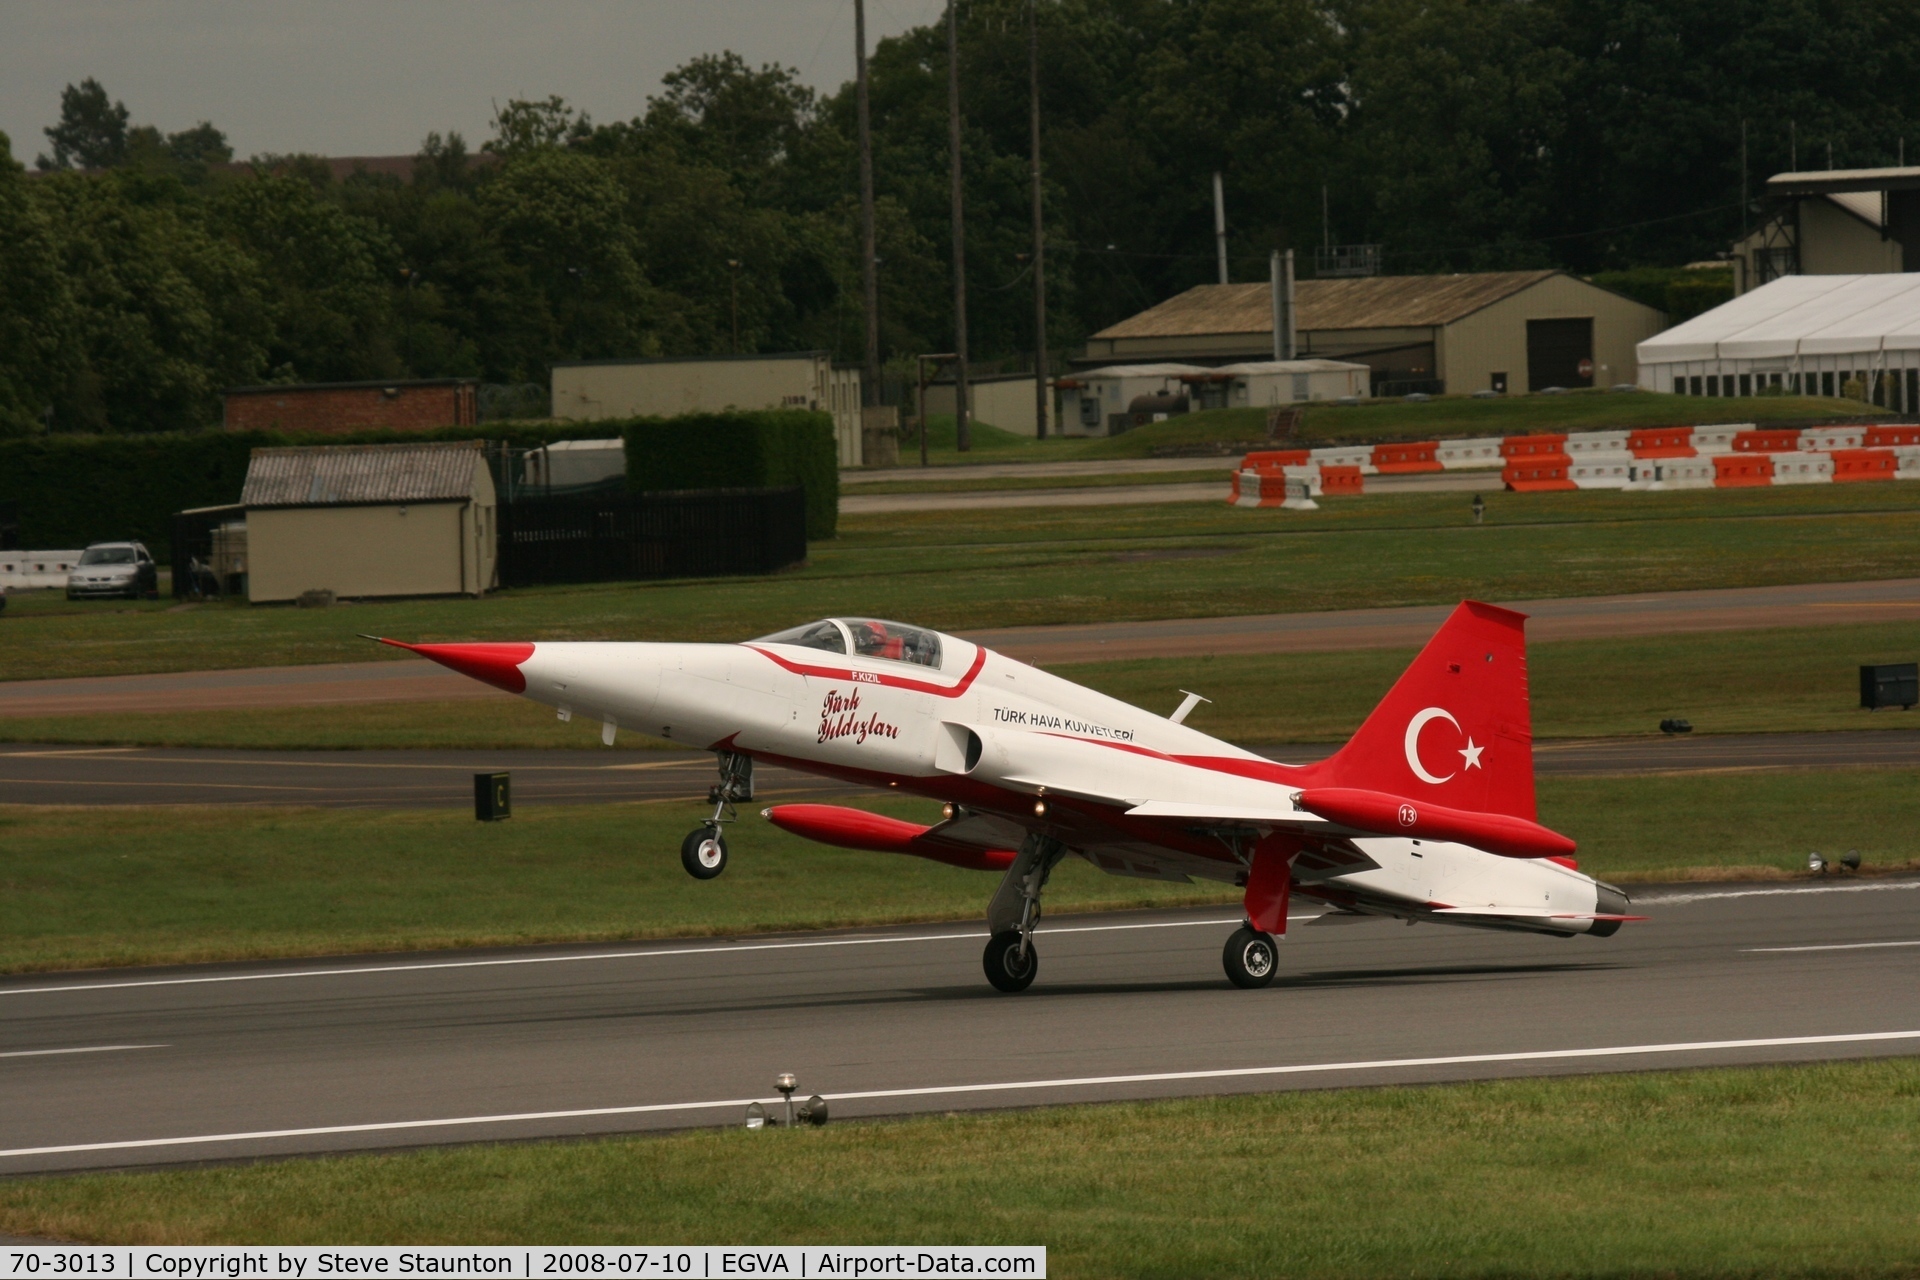 70-3013, Northrop NF-5 Freedom Fighter C/N 3013, Taken at the Royal International Air Tattoo 2008 during arrivals and departures (show days cancelled due to bad weather)